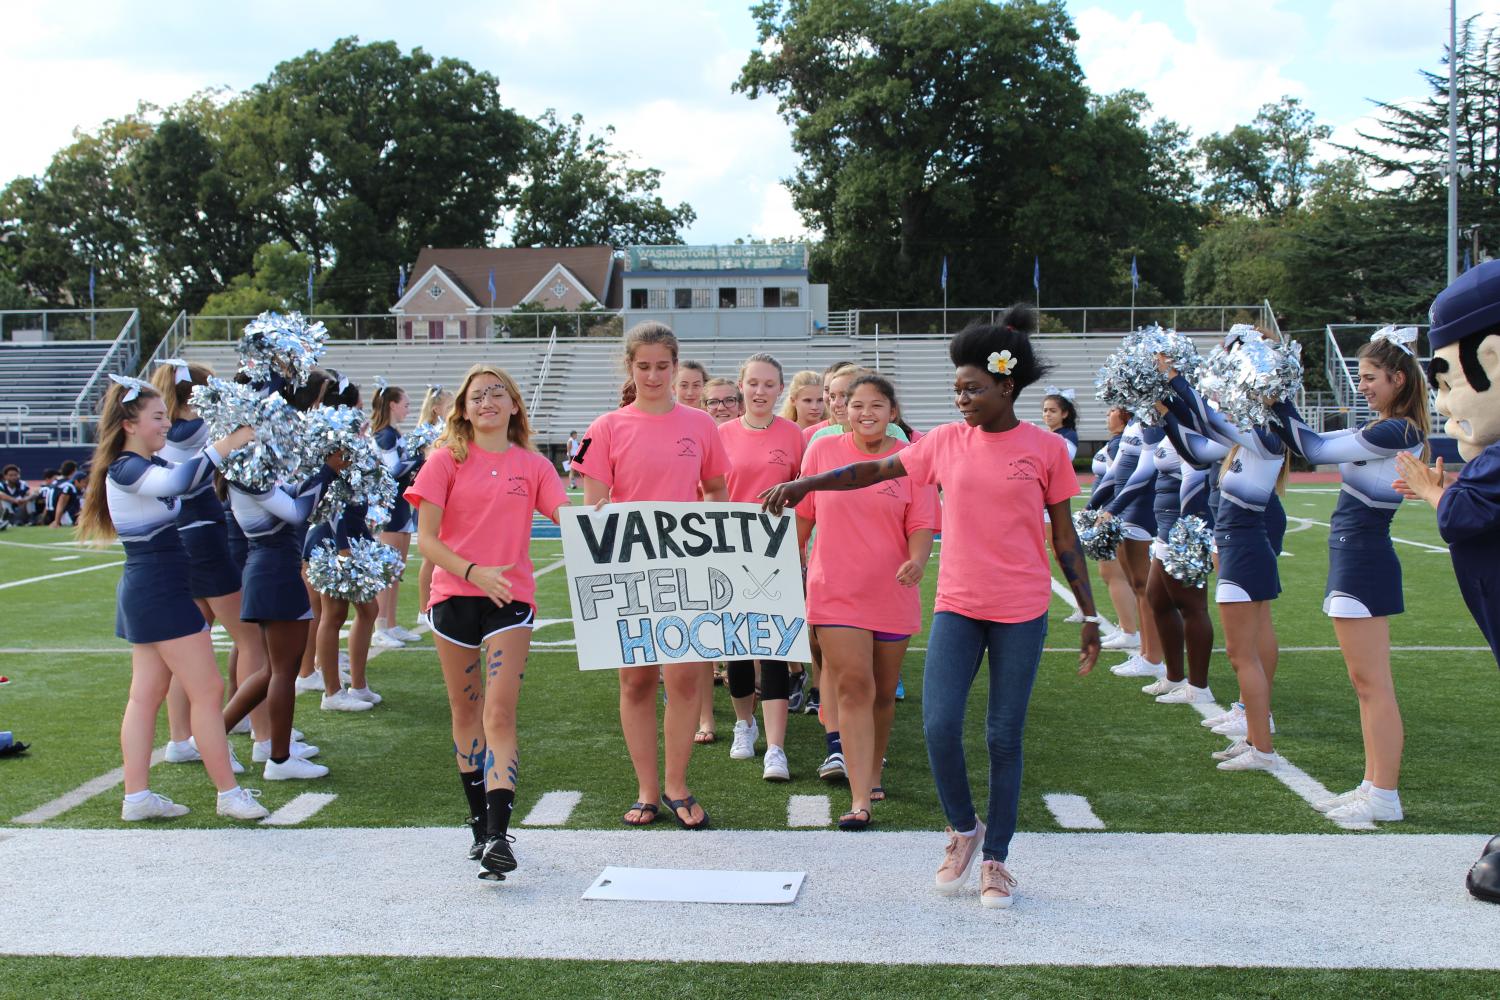 The varsity field hockey team is cheered on by the cheerleaders and the crowd at the pep rally